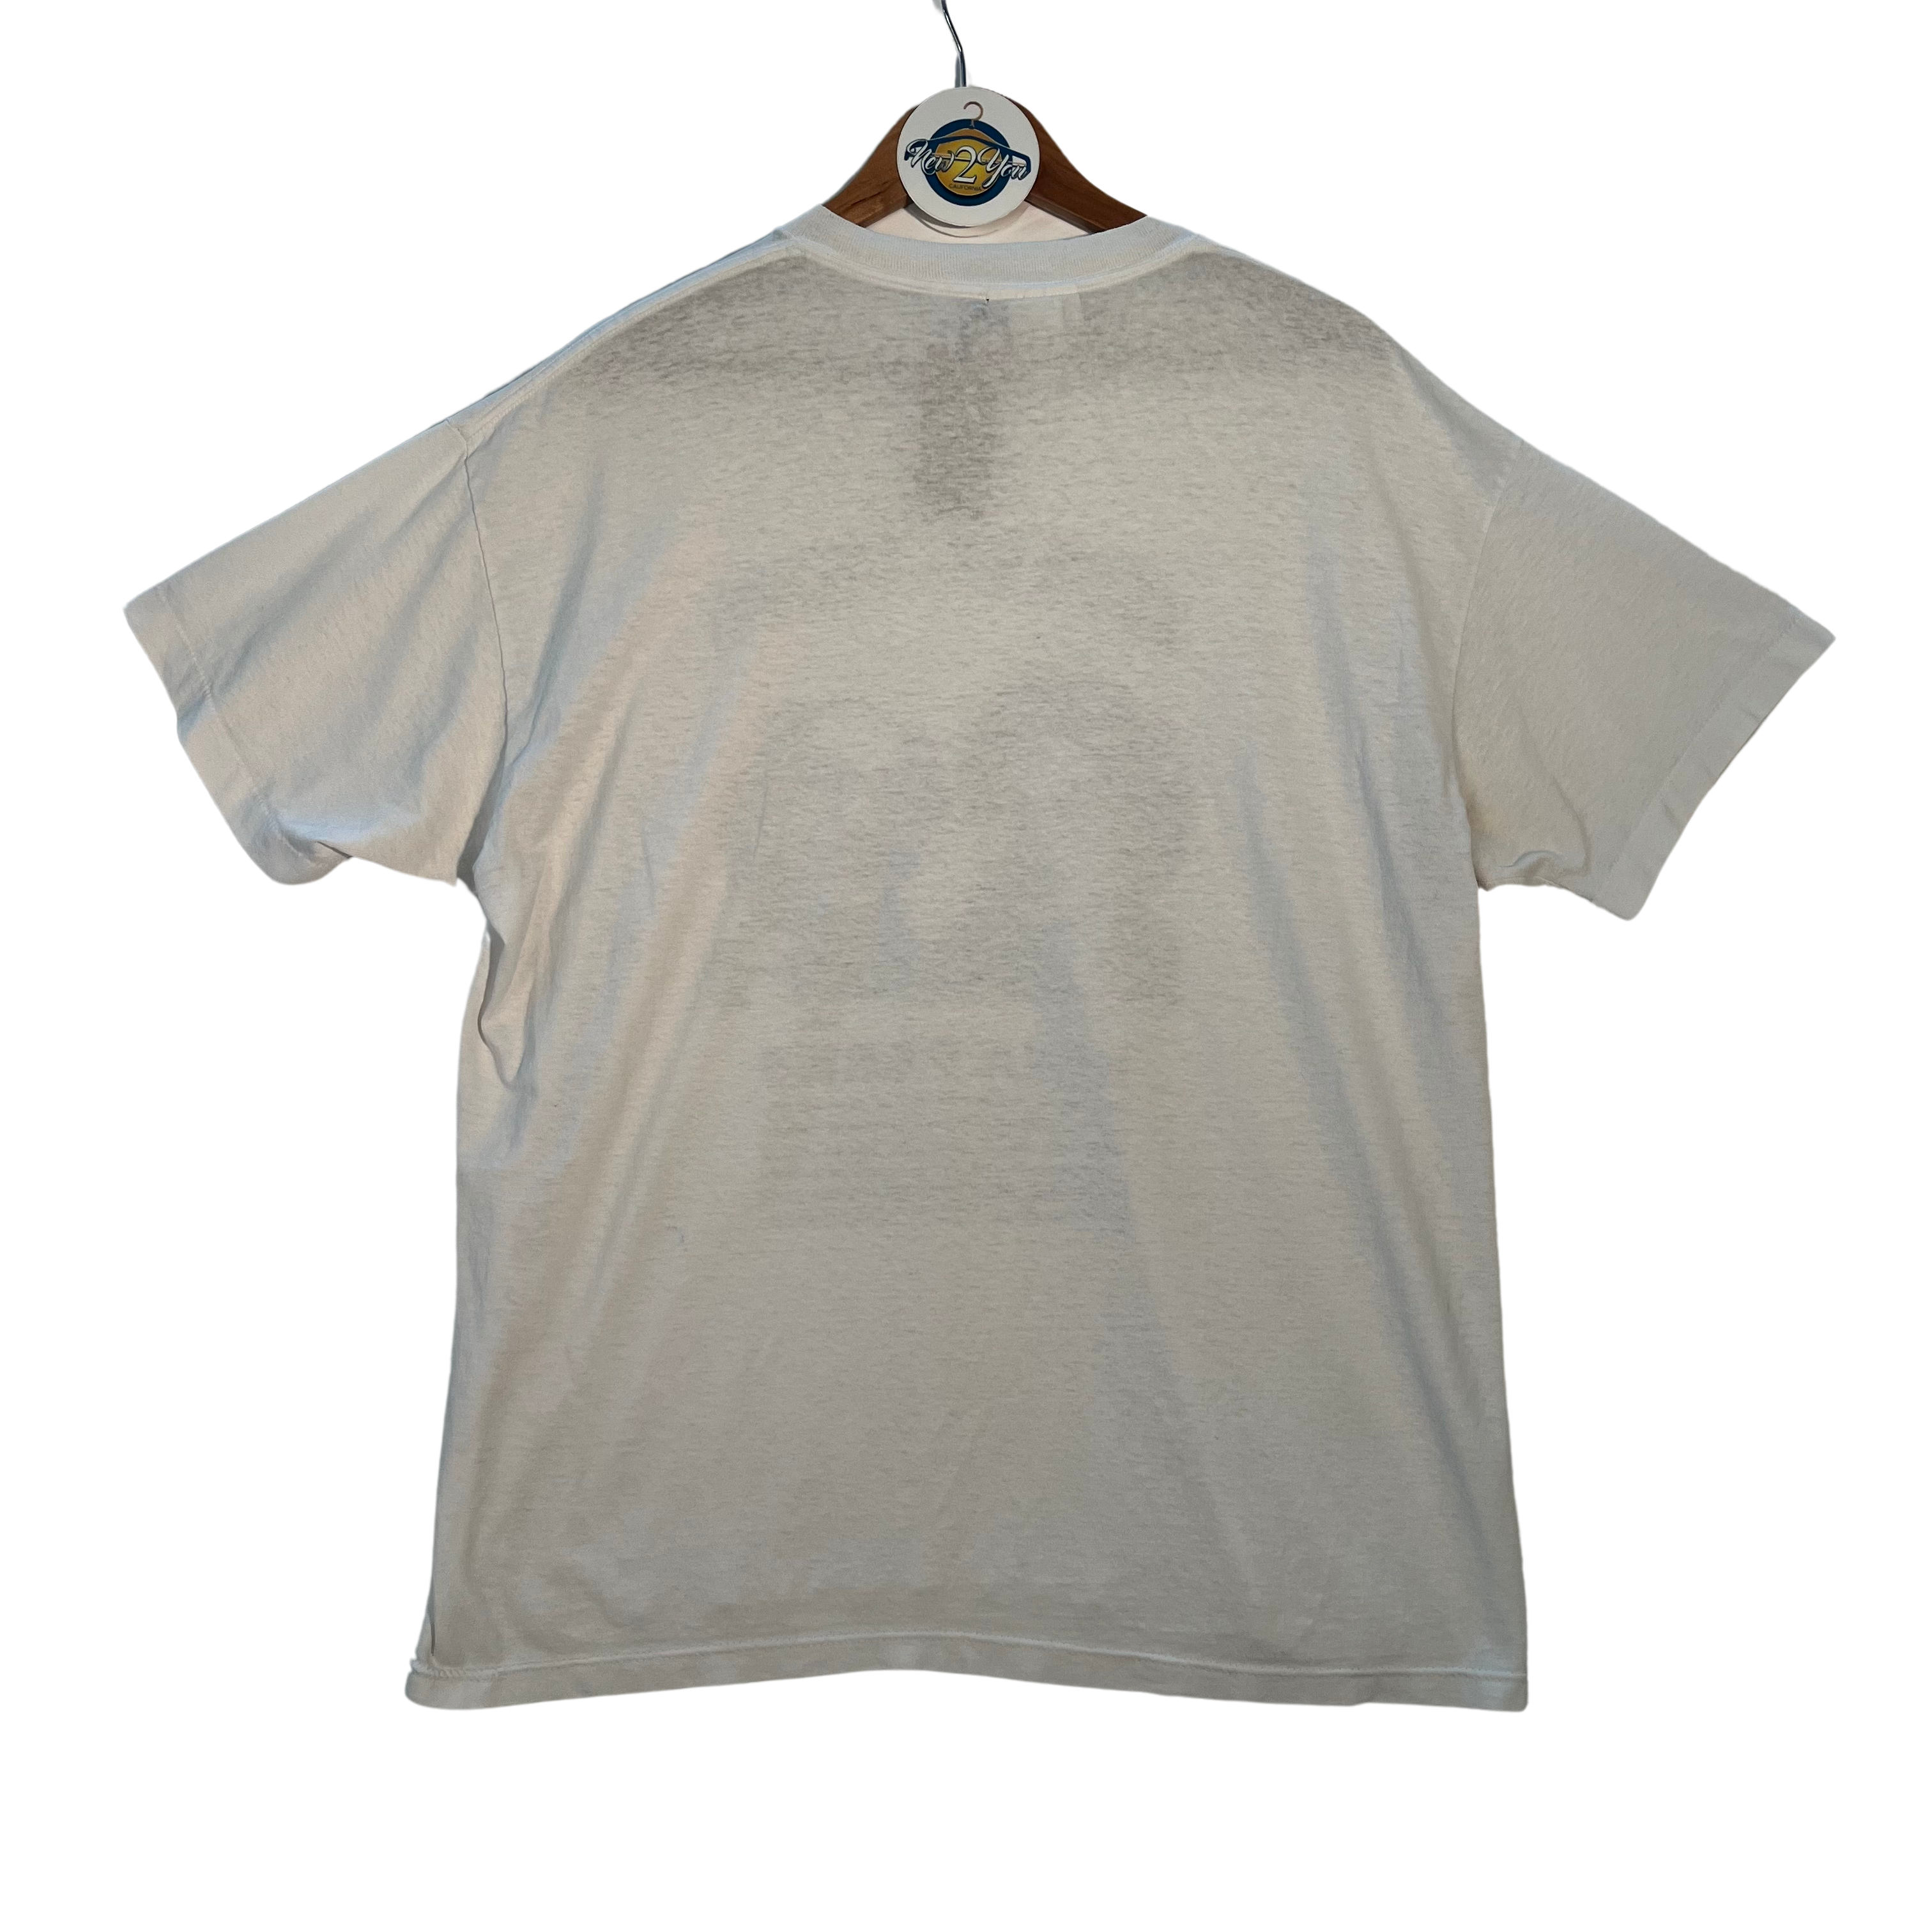 Rosa Parks 'Reflections' Graphic Tee - White - MBC